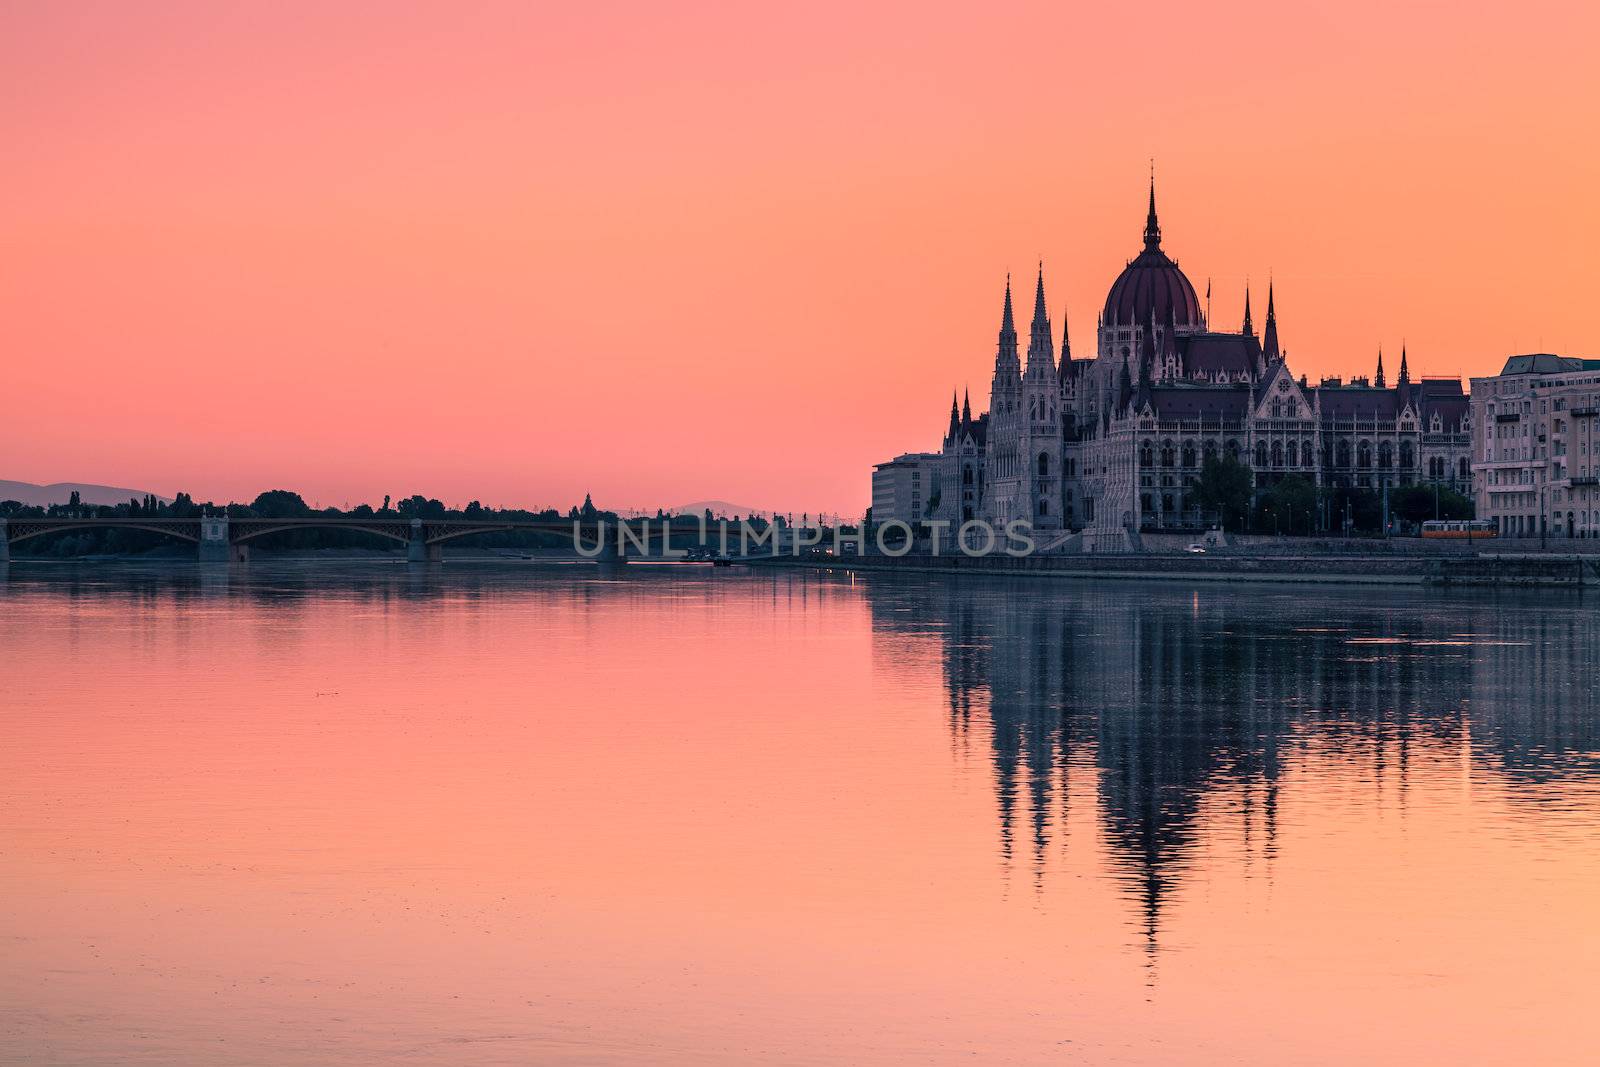 The Parliament Building in Budapest at Dawn